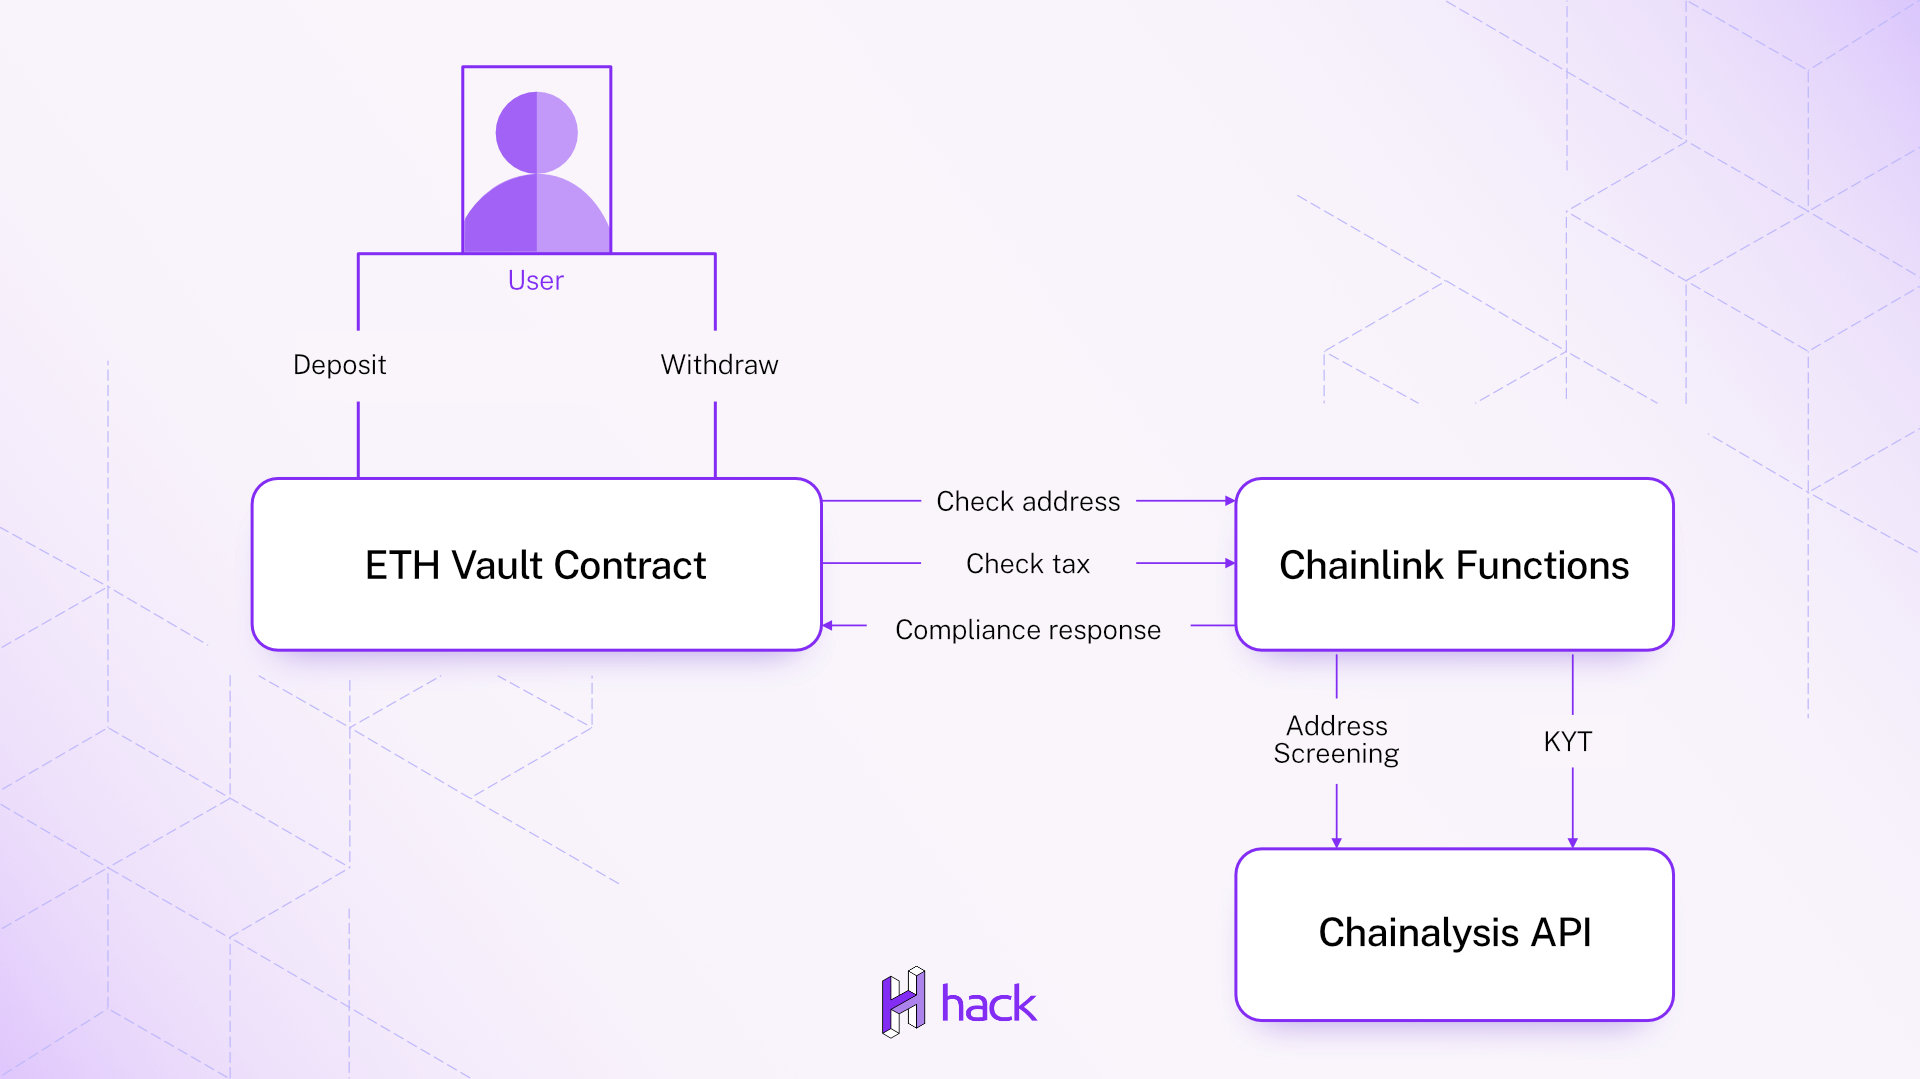 Cover Image for Case Study: Chainlink Functions & Chainalysis Integration for Compliant On-Chain Finance